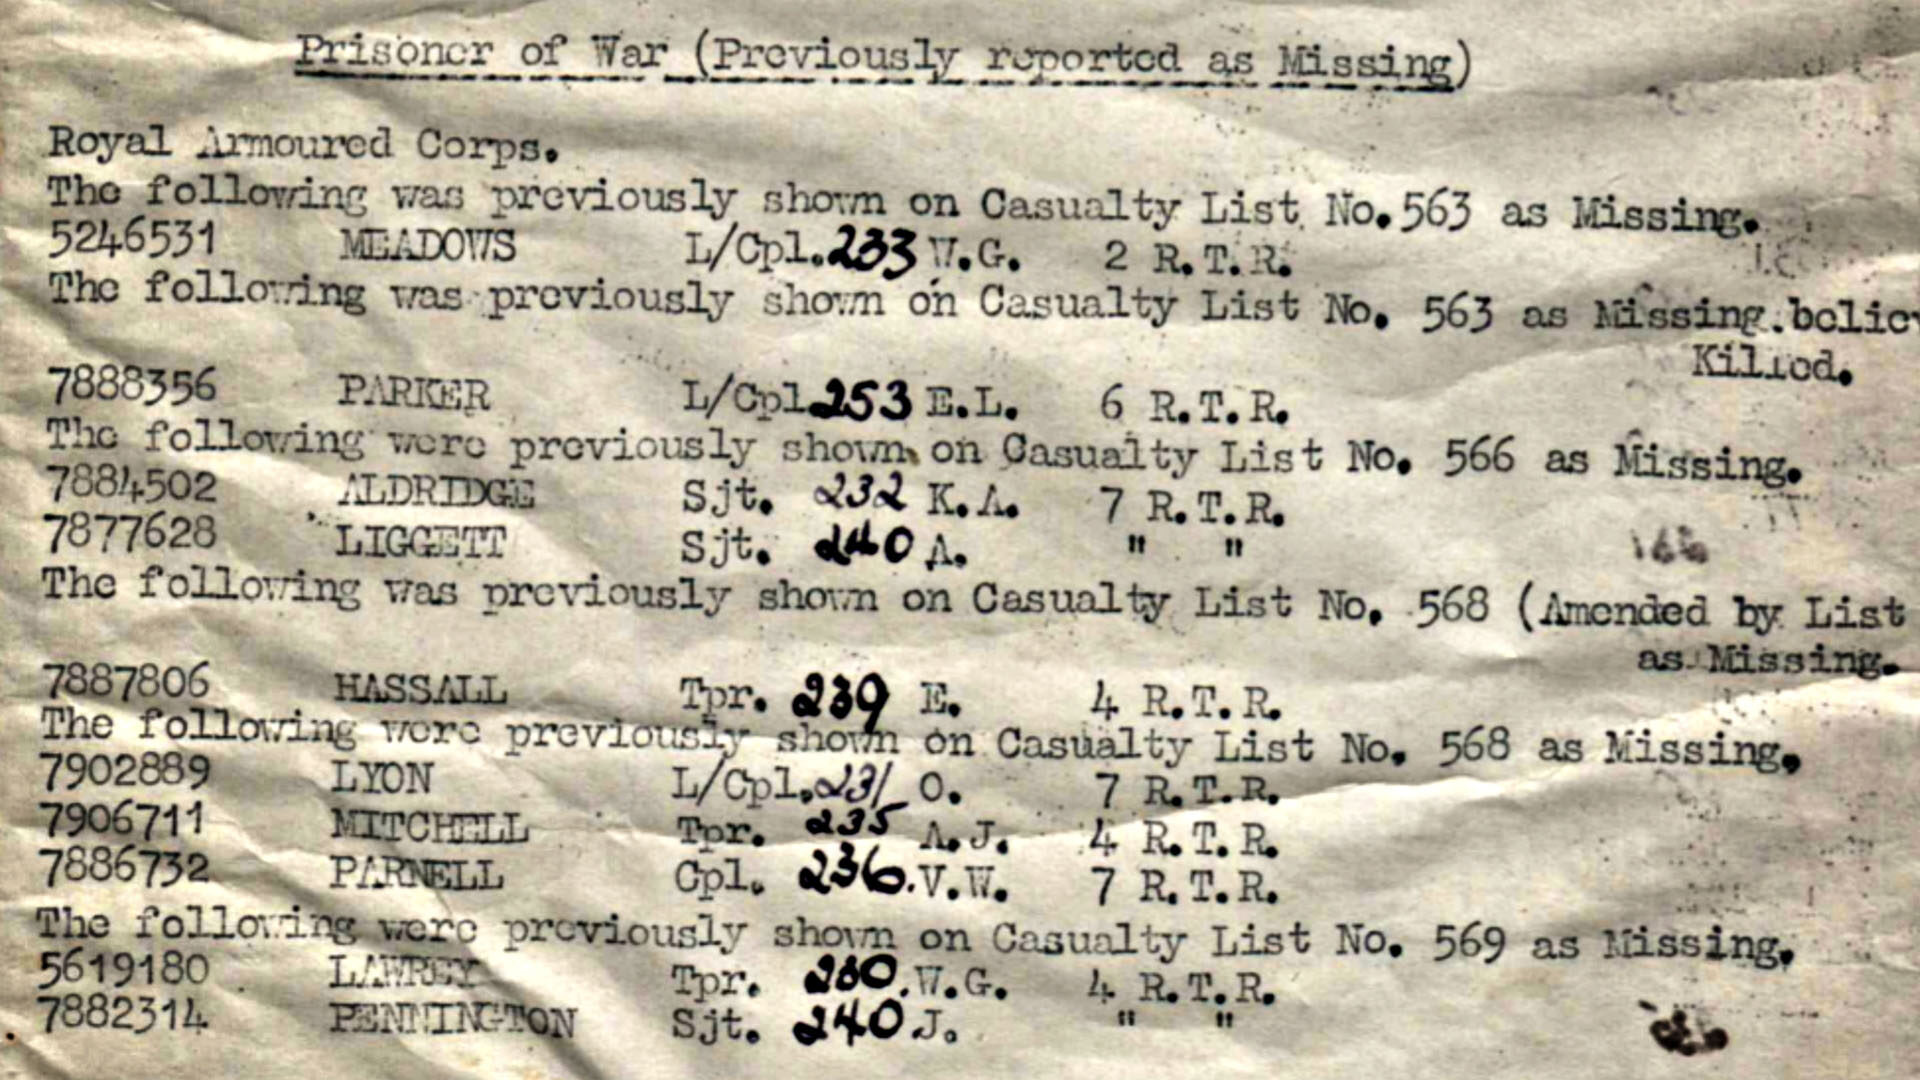 British War Office Casualty List no. 600 showing Sergeant Alexander Liggett of 7 Royal Tank Regiment as a prisoner of war following his capture in the Western Desert in 1941.